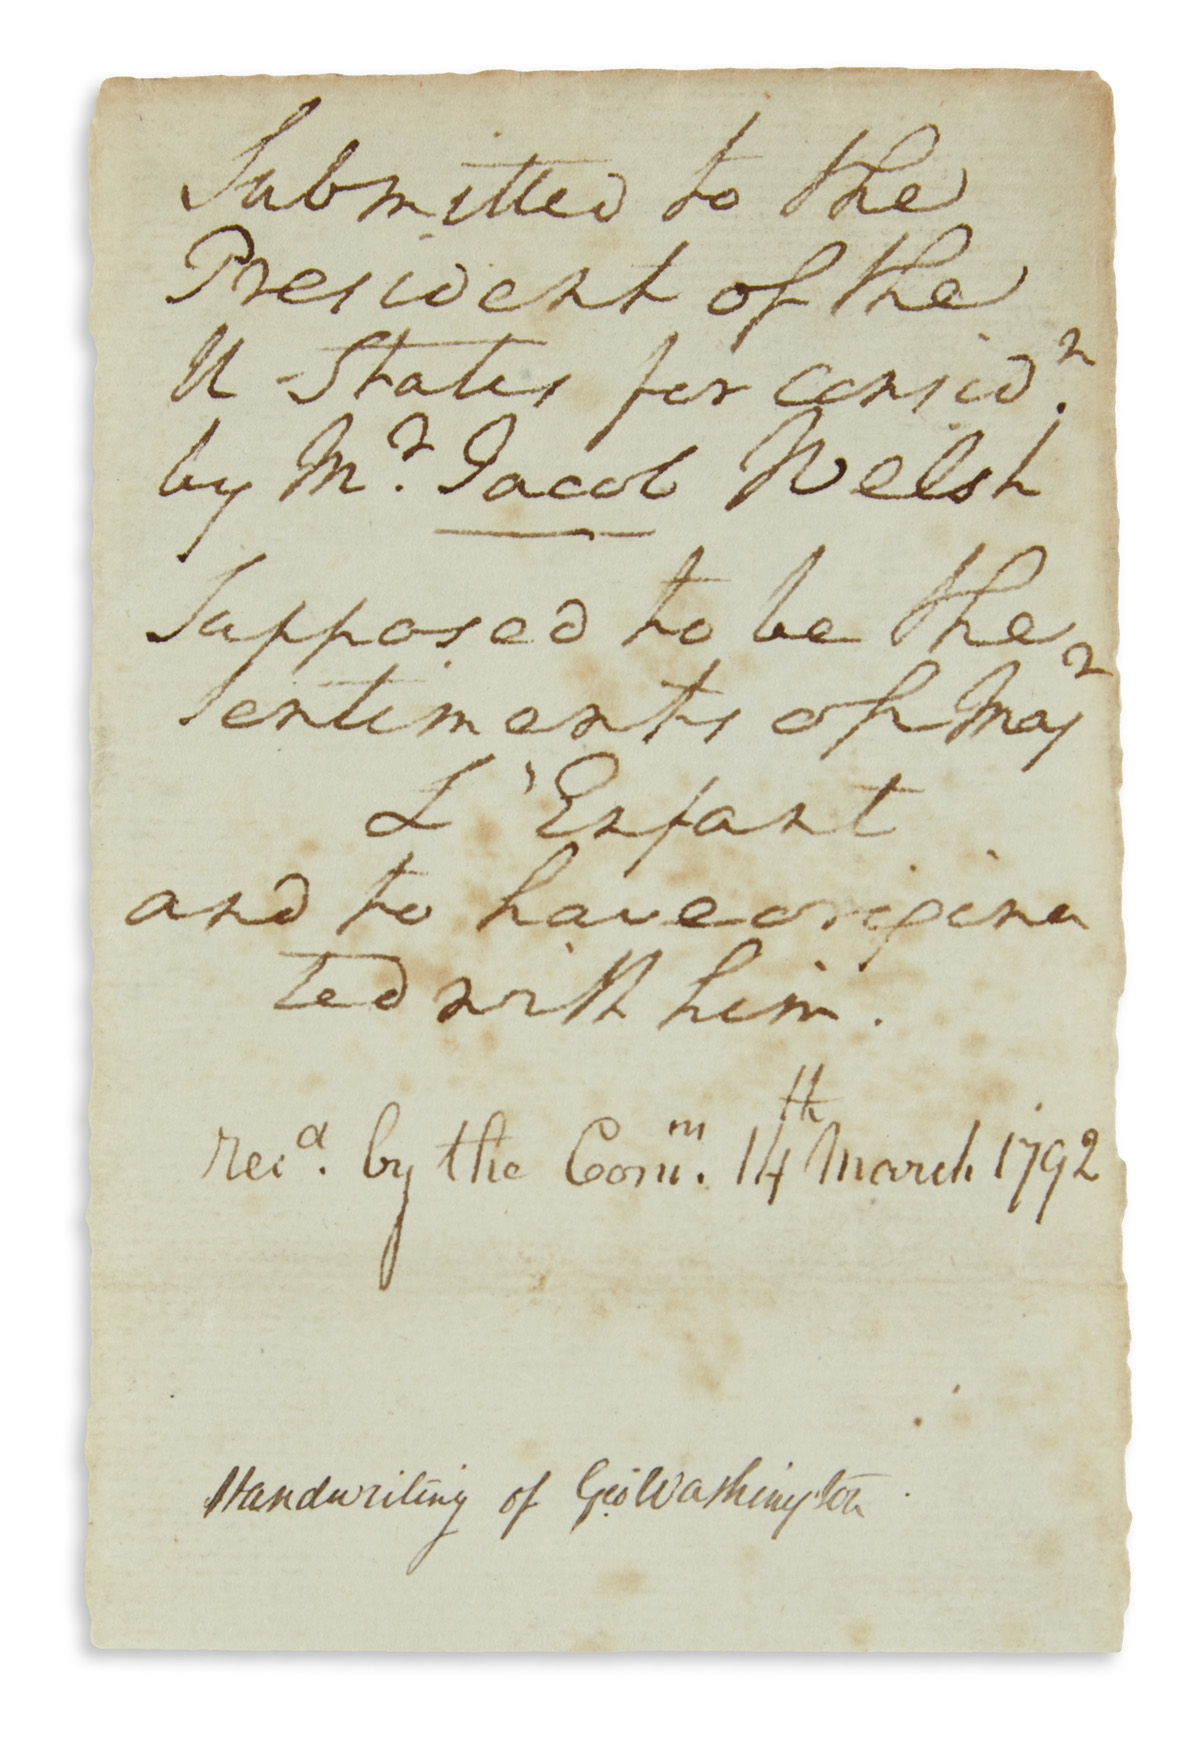 WASHINGTON, GEORGE. Autograph Manuscript, unsigned, 9 lines, likely an endorsement on a now absent communication: